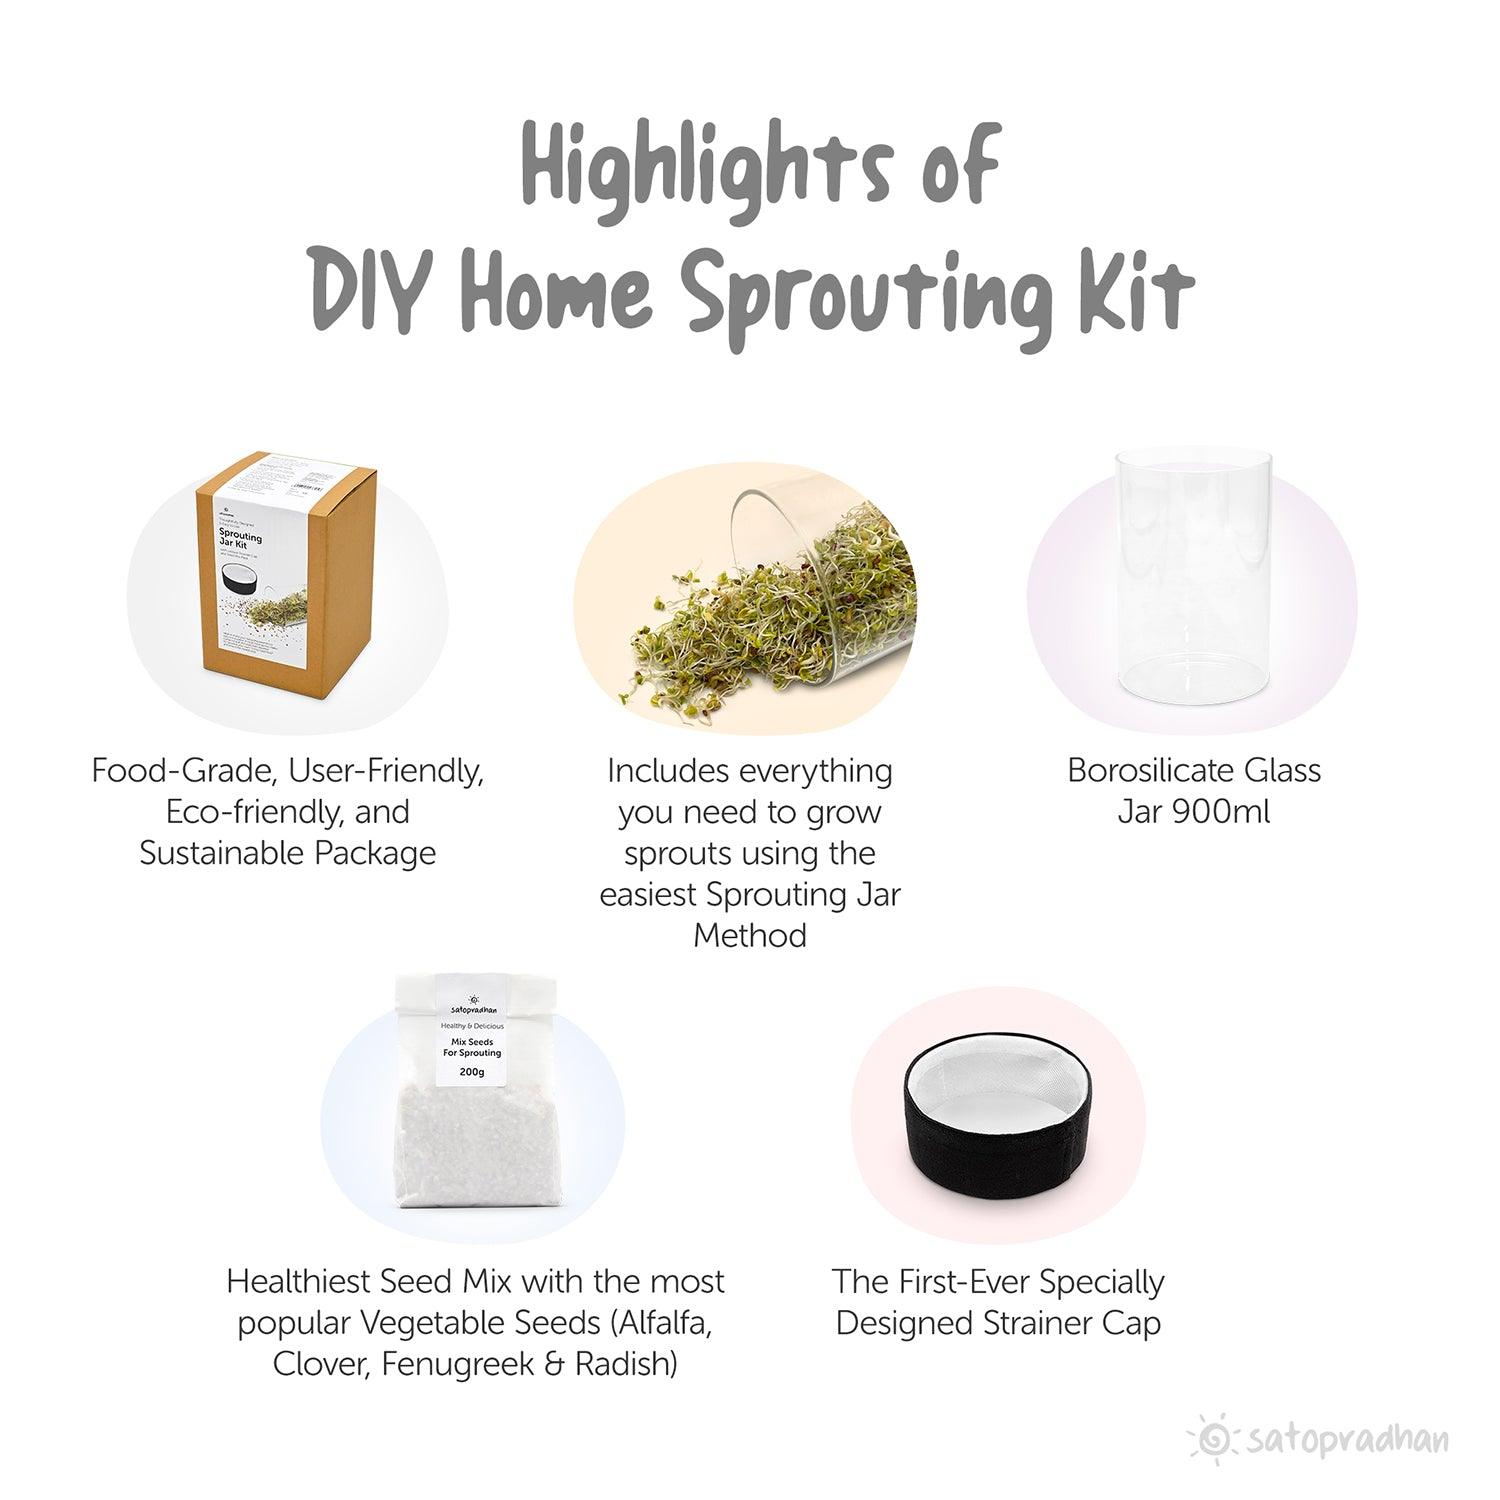 Sprouting Jar Kit - Unique Strainer Cap and Seed Mix Pack - Thoughtfully Designed & Easy to Use DIY Growing Kit